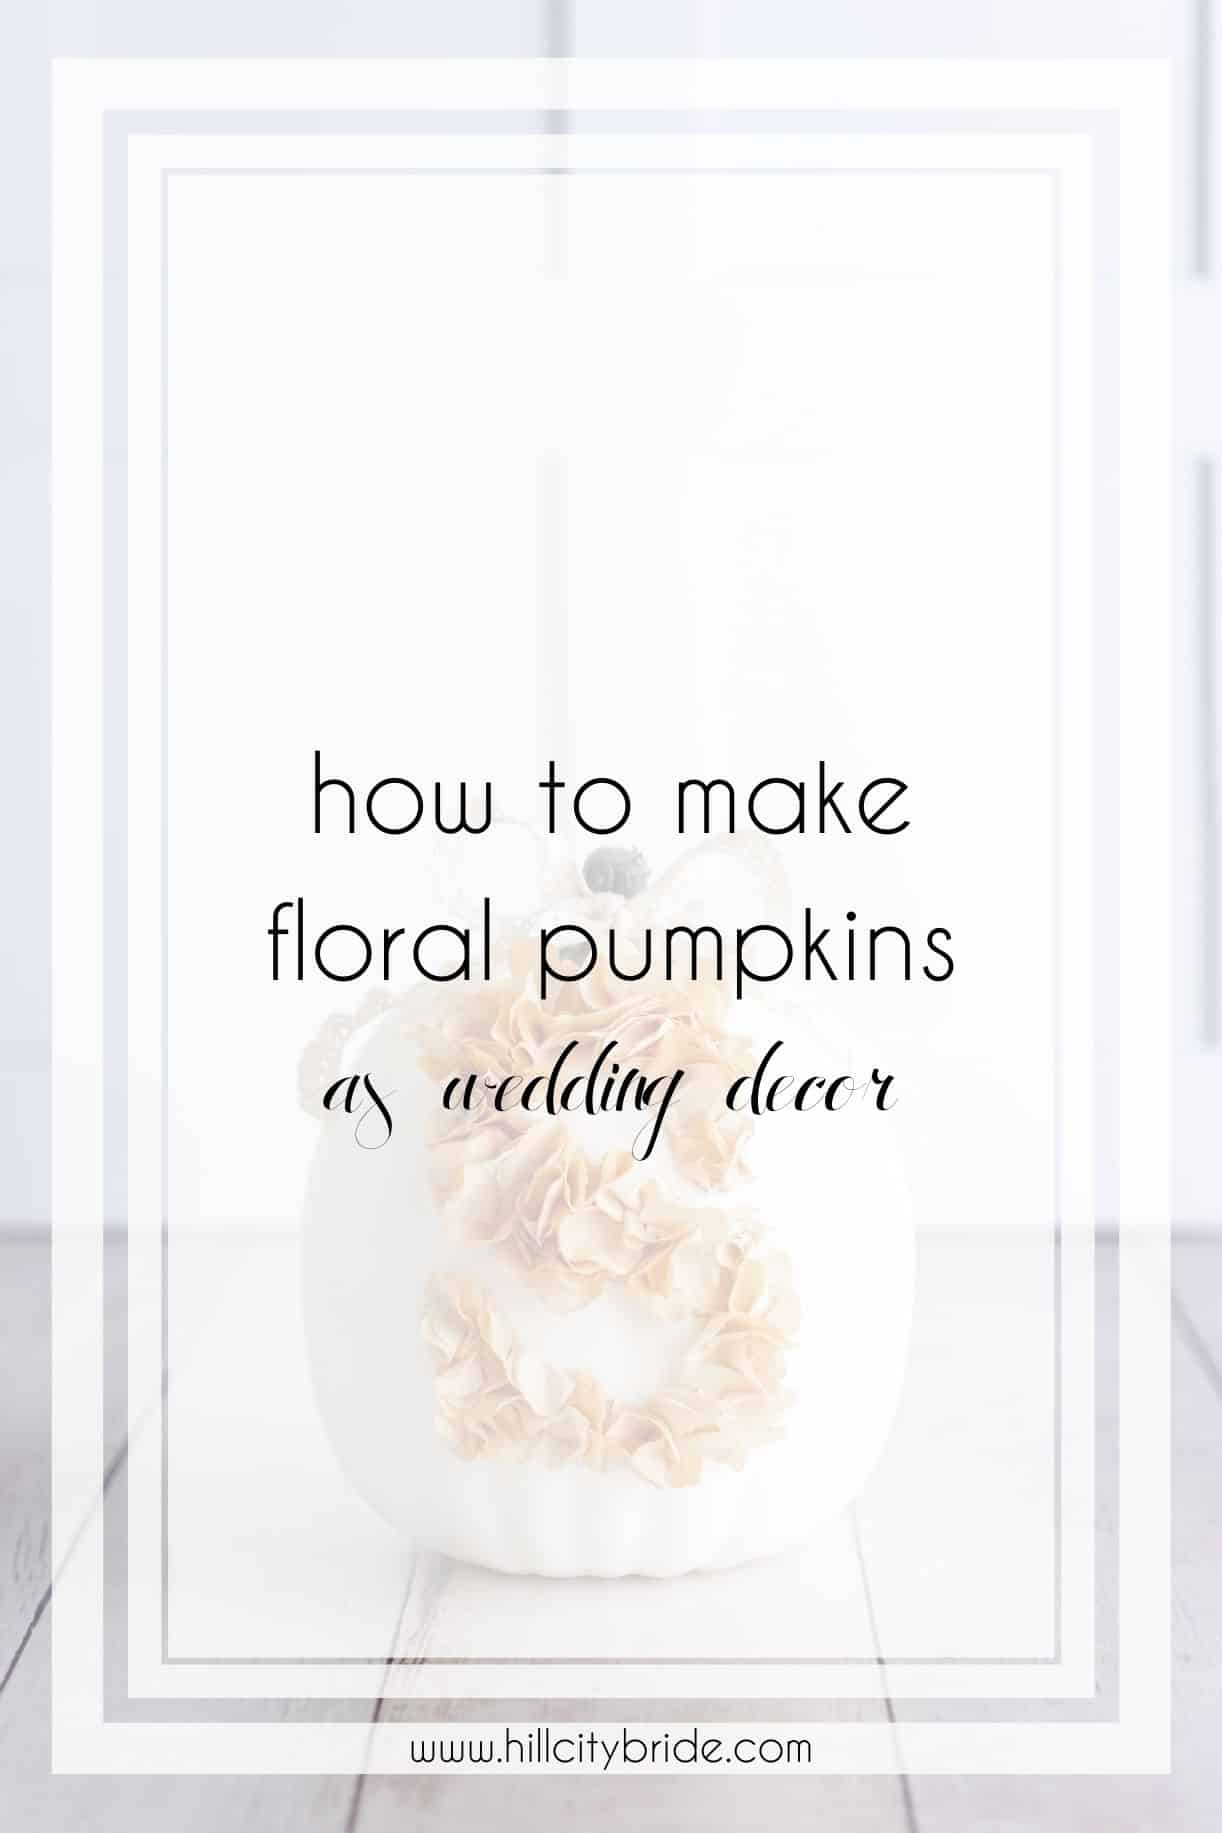 How to Make Floral Pumpkins to Beautifully Enhance Your Big Day